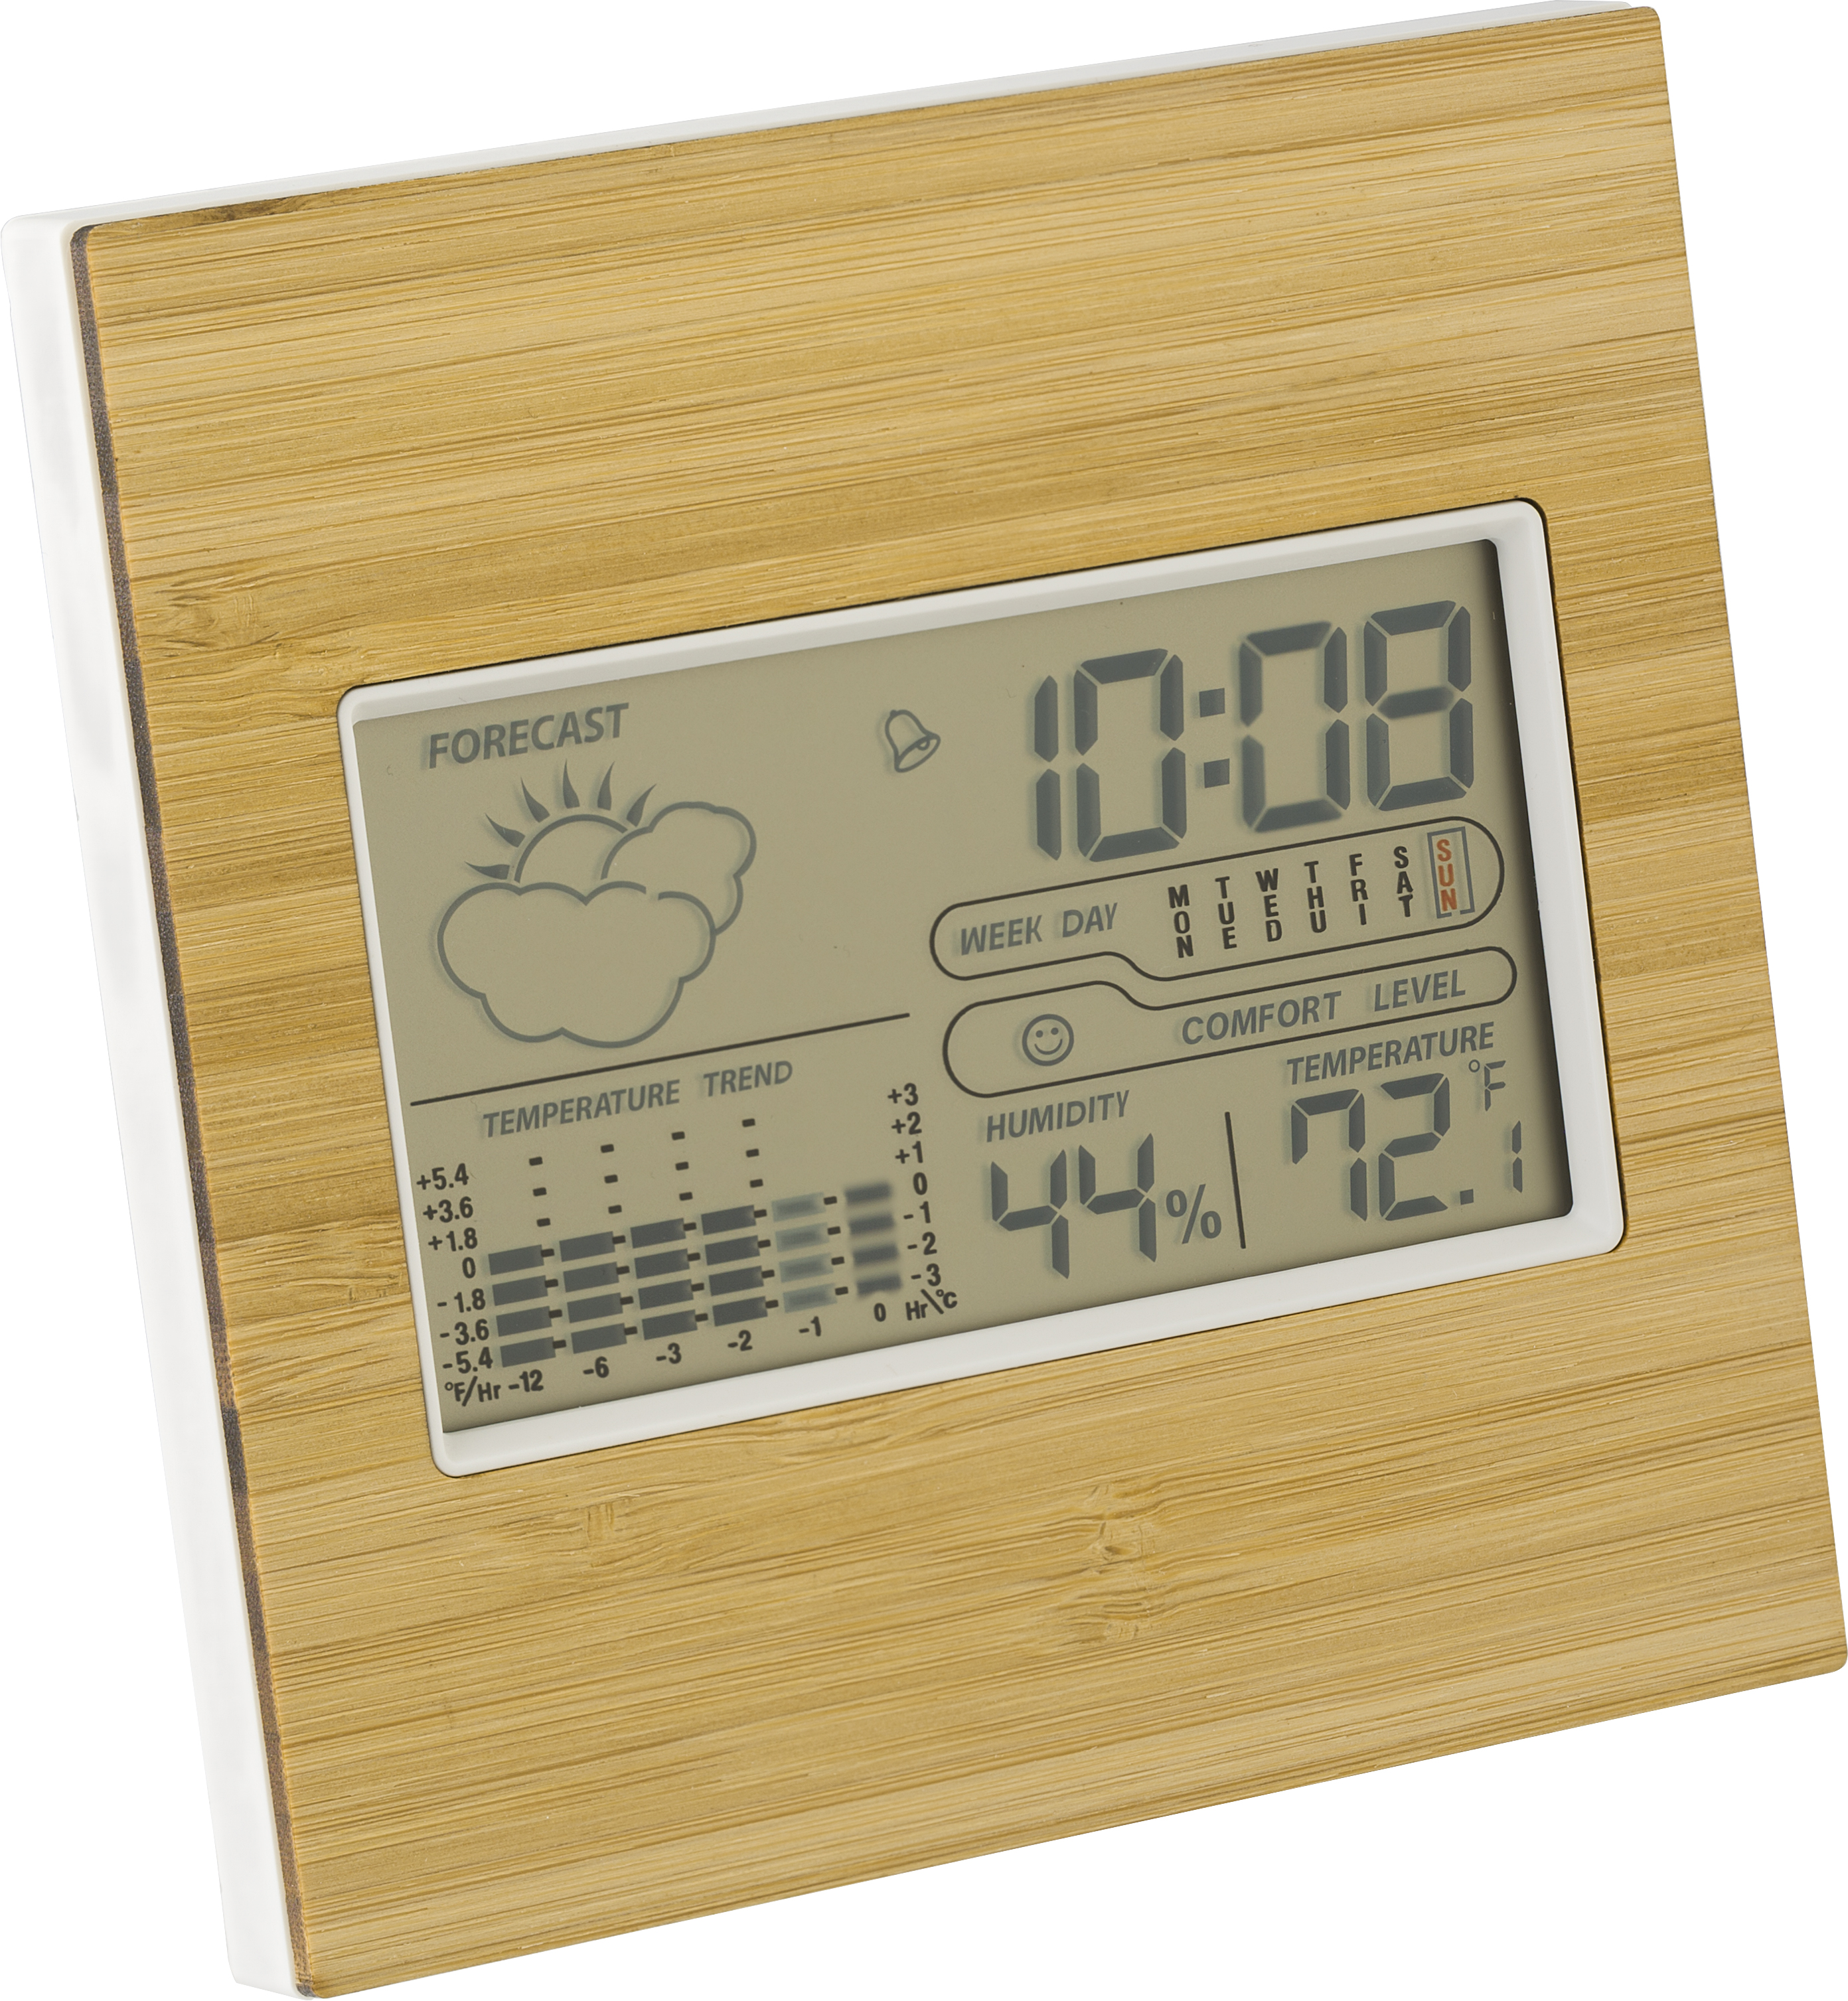 000000710322 823999999 3d135 lft pro01 2021 fal - Square Bamboo weather station